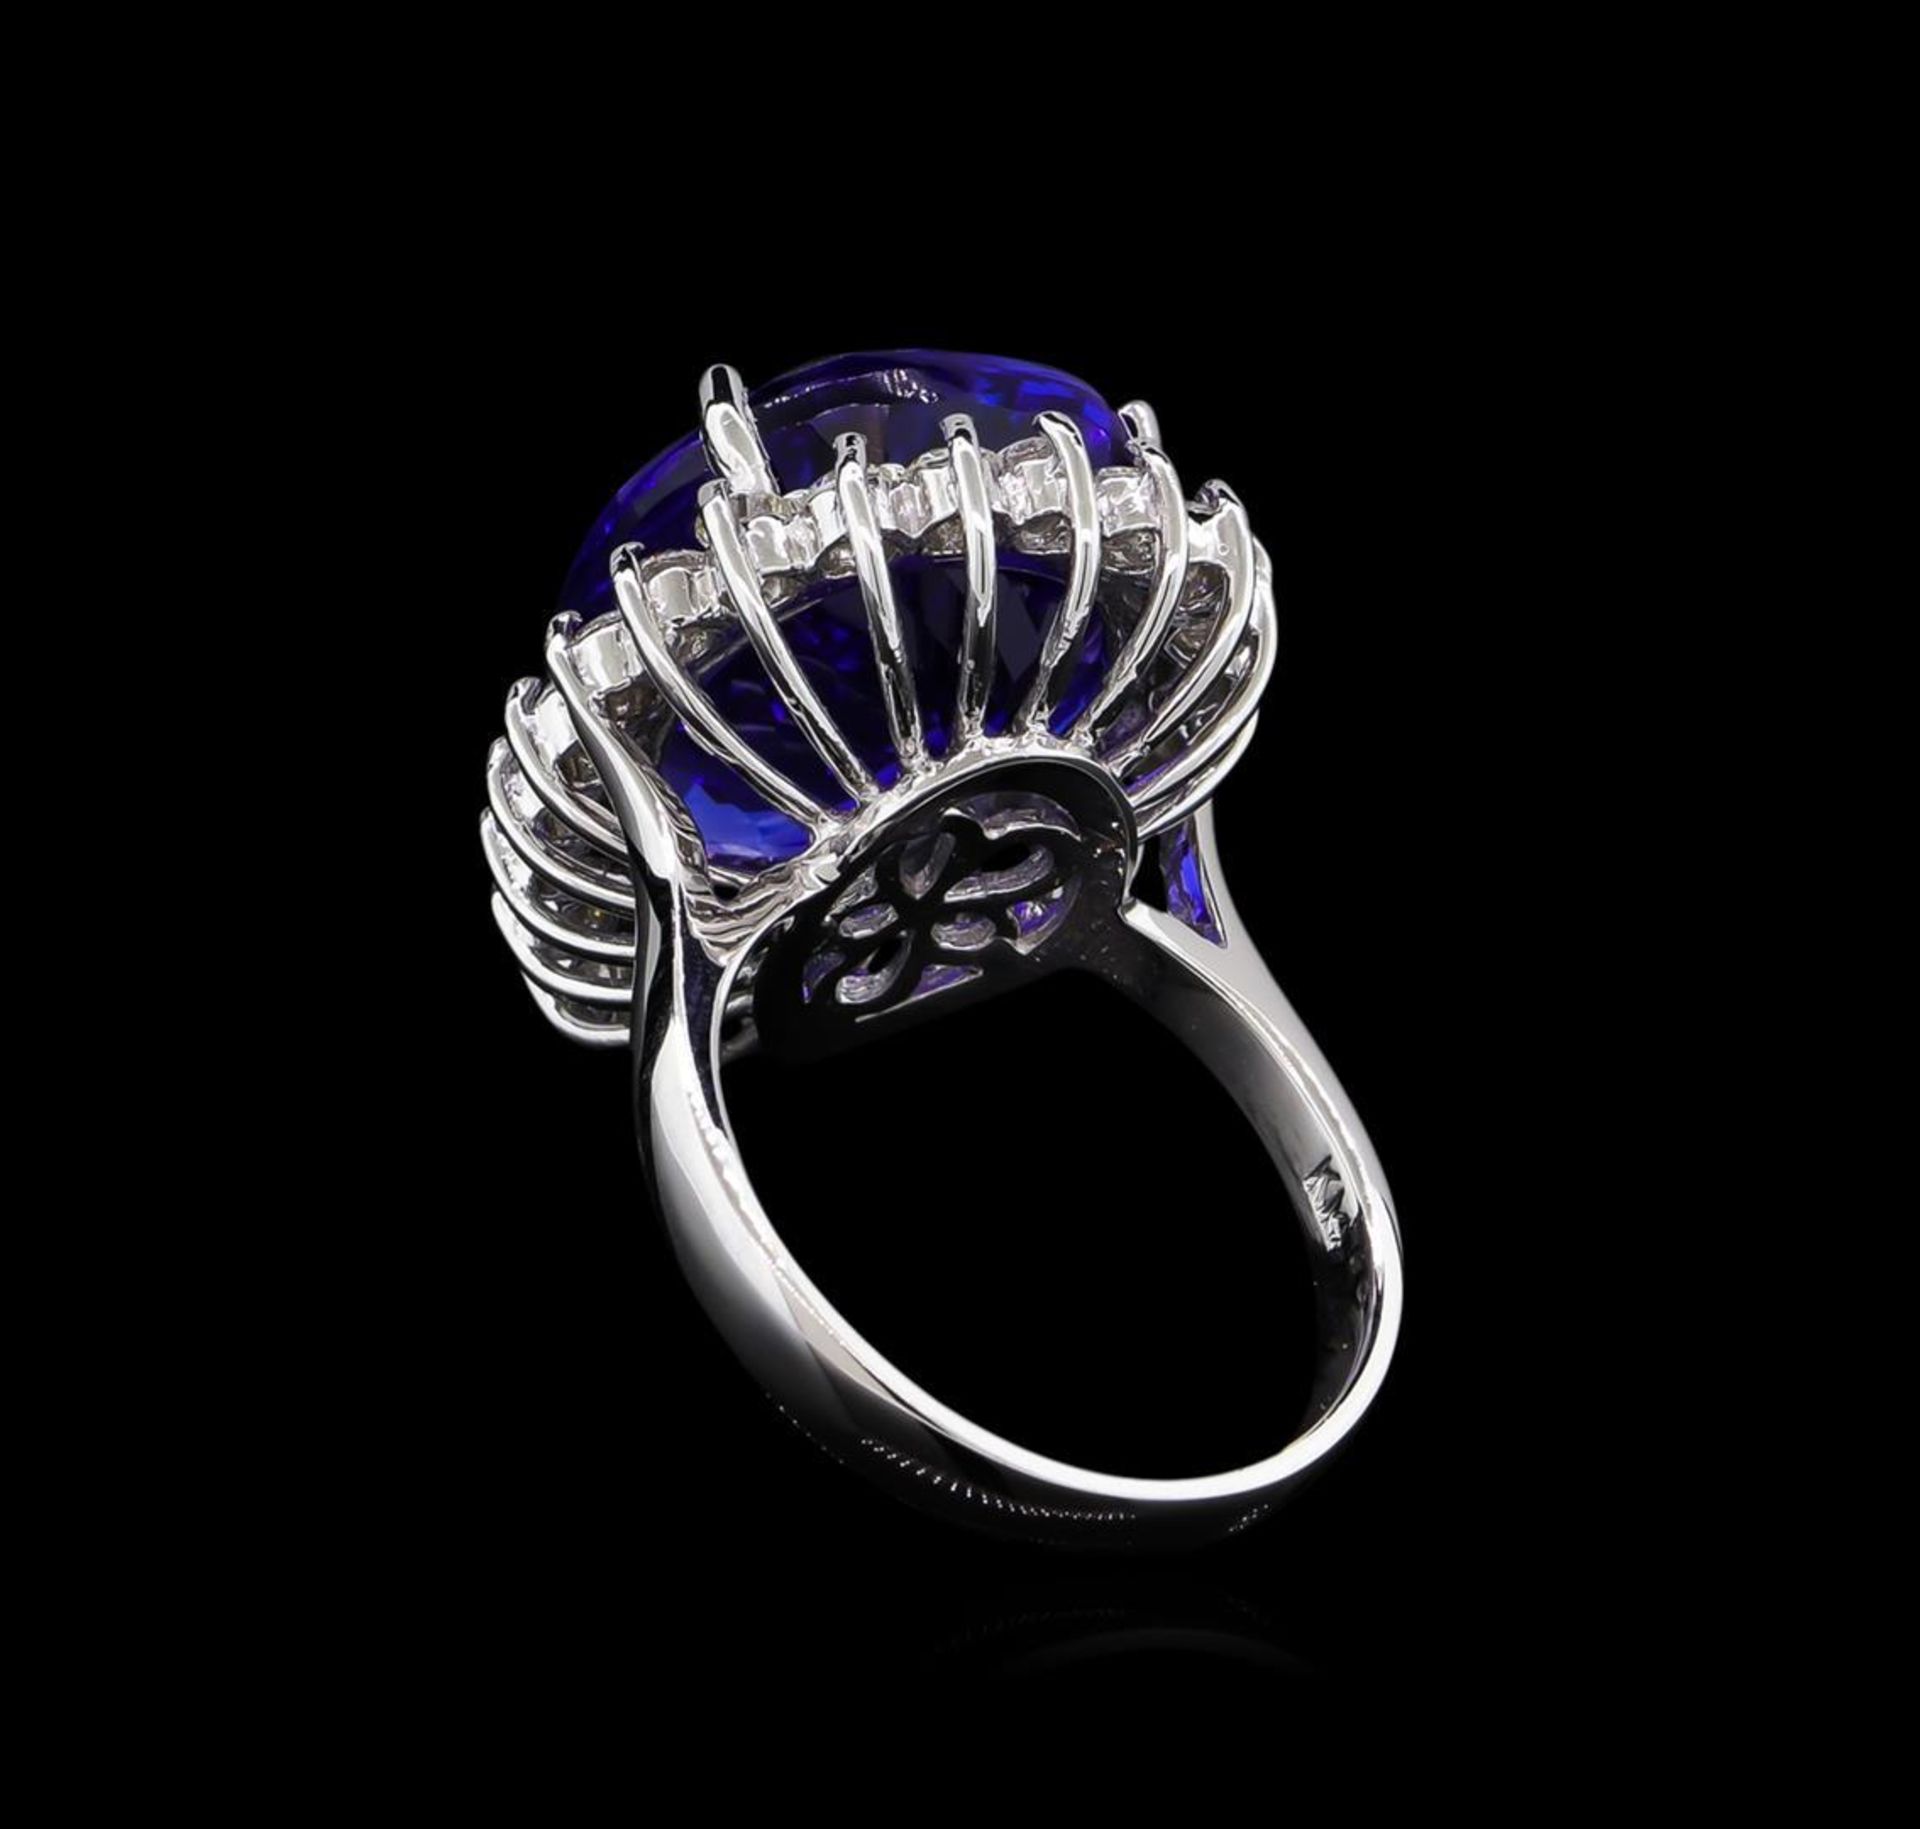 14KT White Gold GIA Certified 16.98 ctw Tanzanite and Diamond Ring - Image 3 of 6